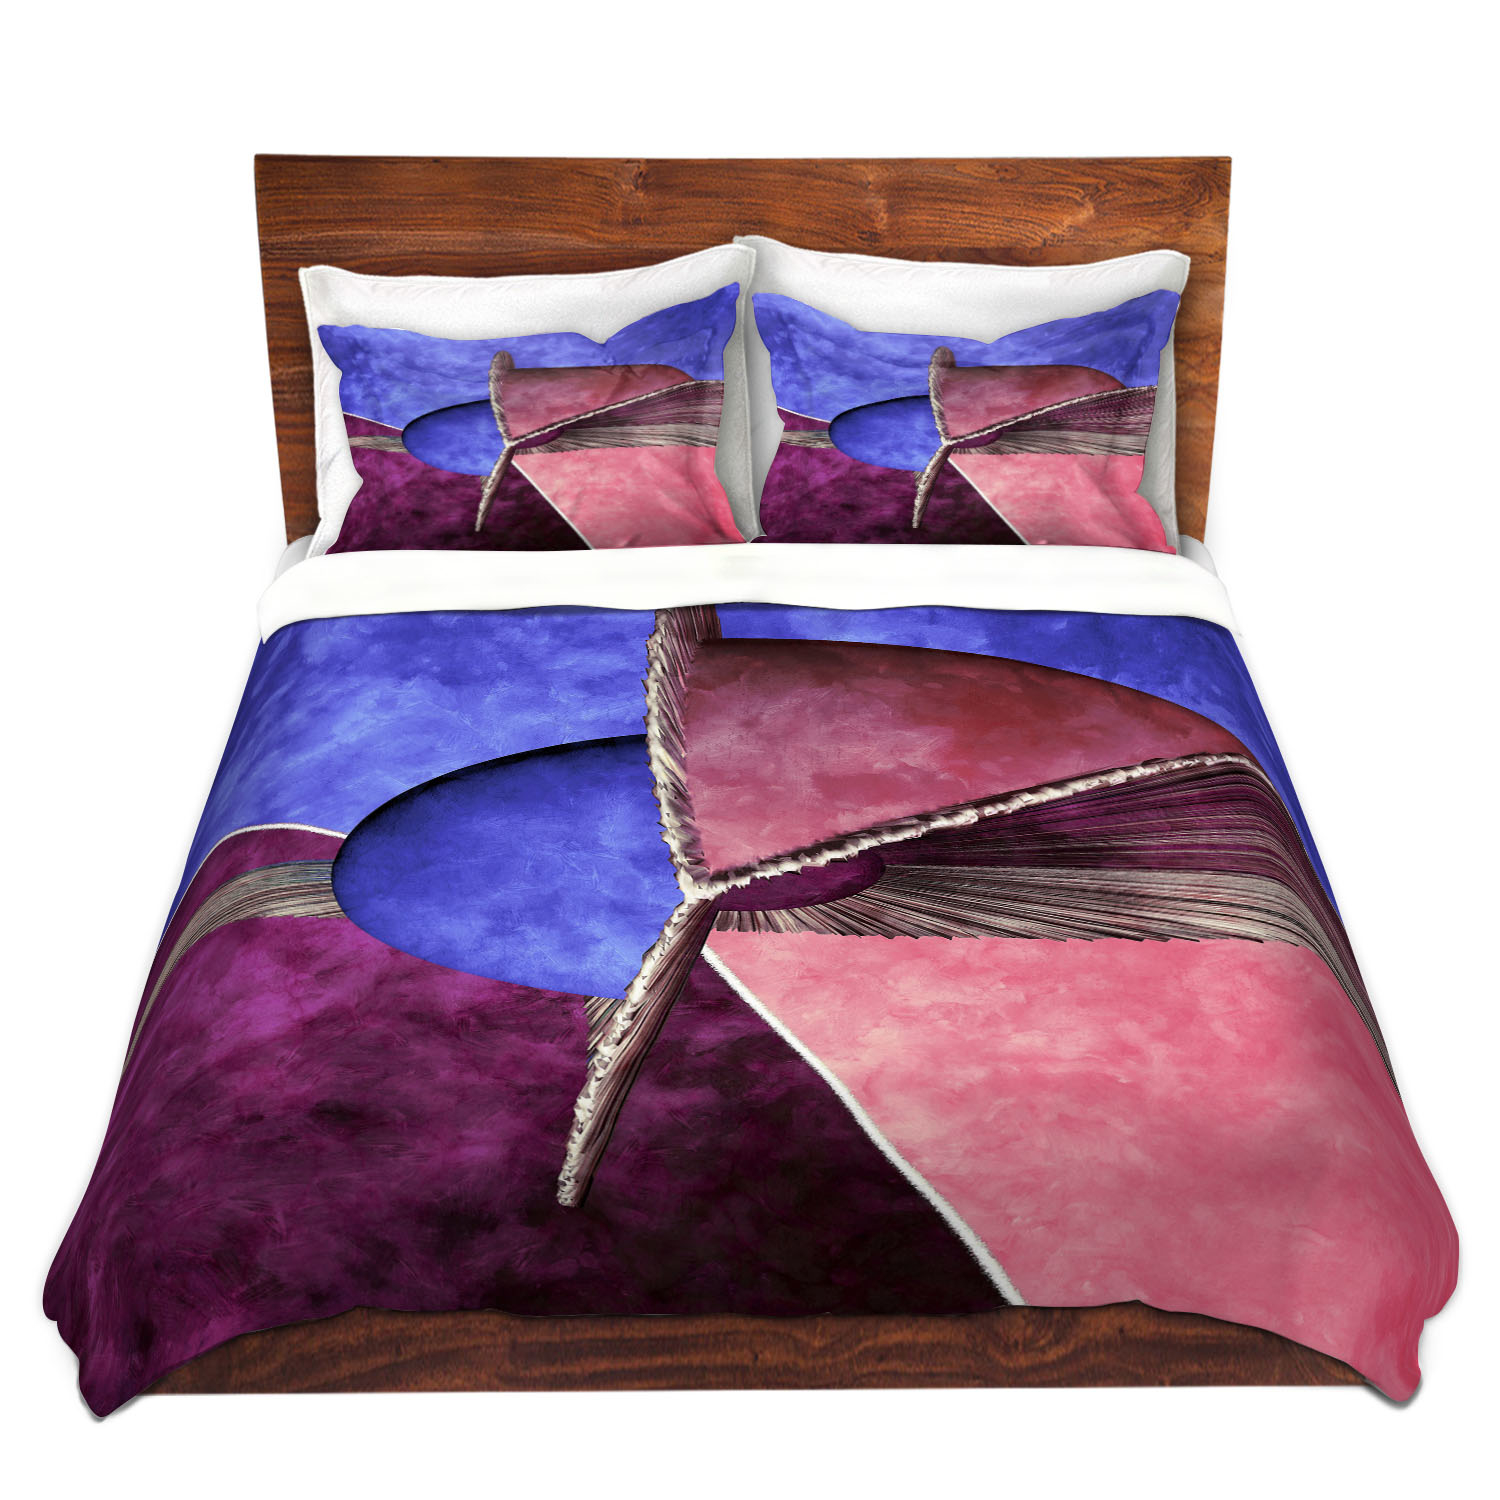 Dianoche Microfiber Duvet Covers By Angelina Vick - Abstract 24